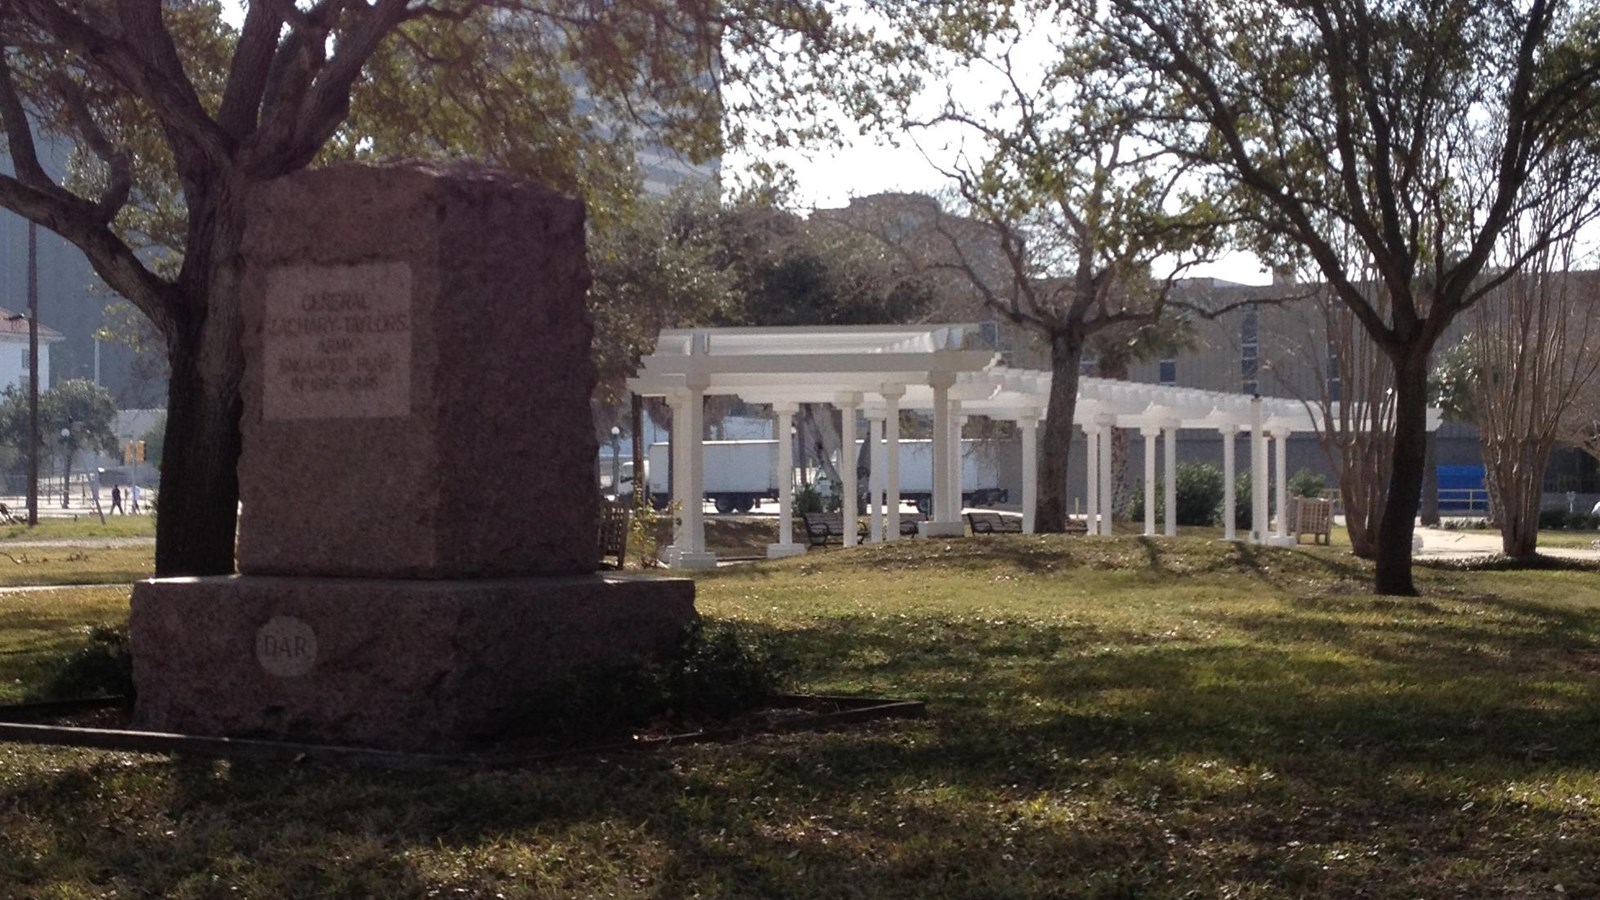 Artesian Park marker in foreground with white pergola in background